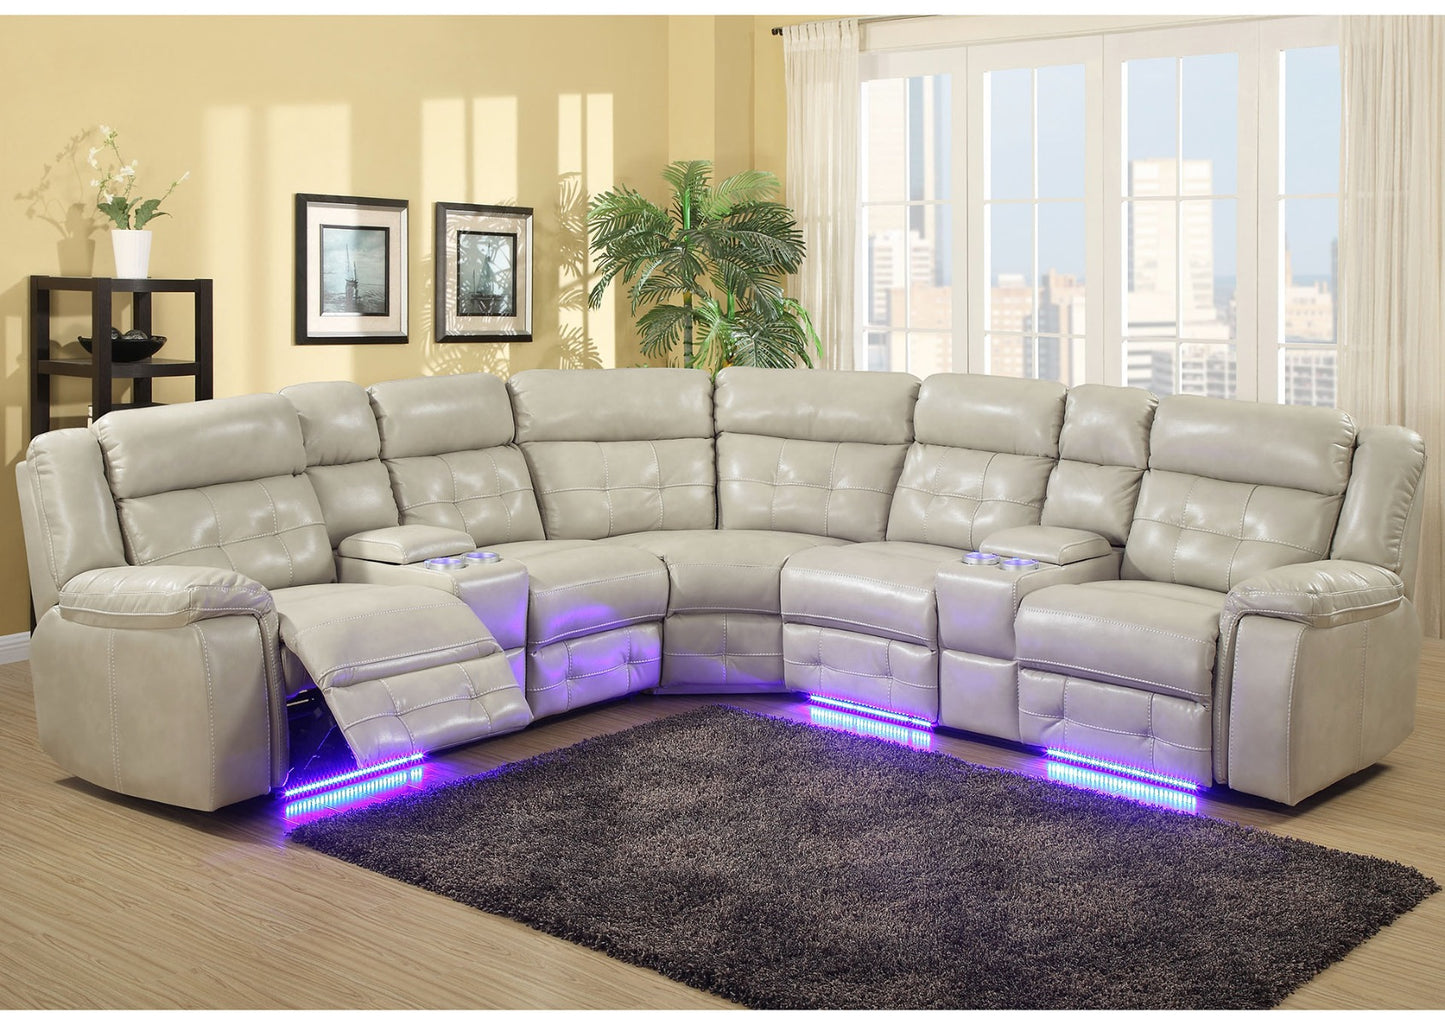 Galaxy Home Power Sectional w/3 Recliners & LED LIghts - 2 Colors